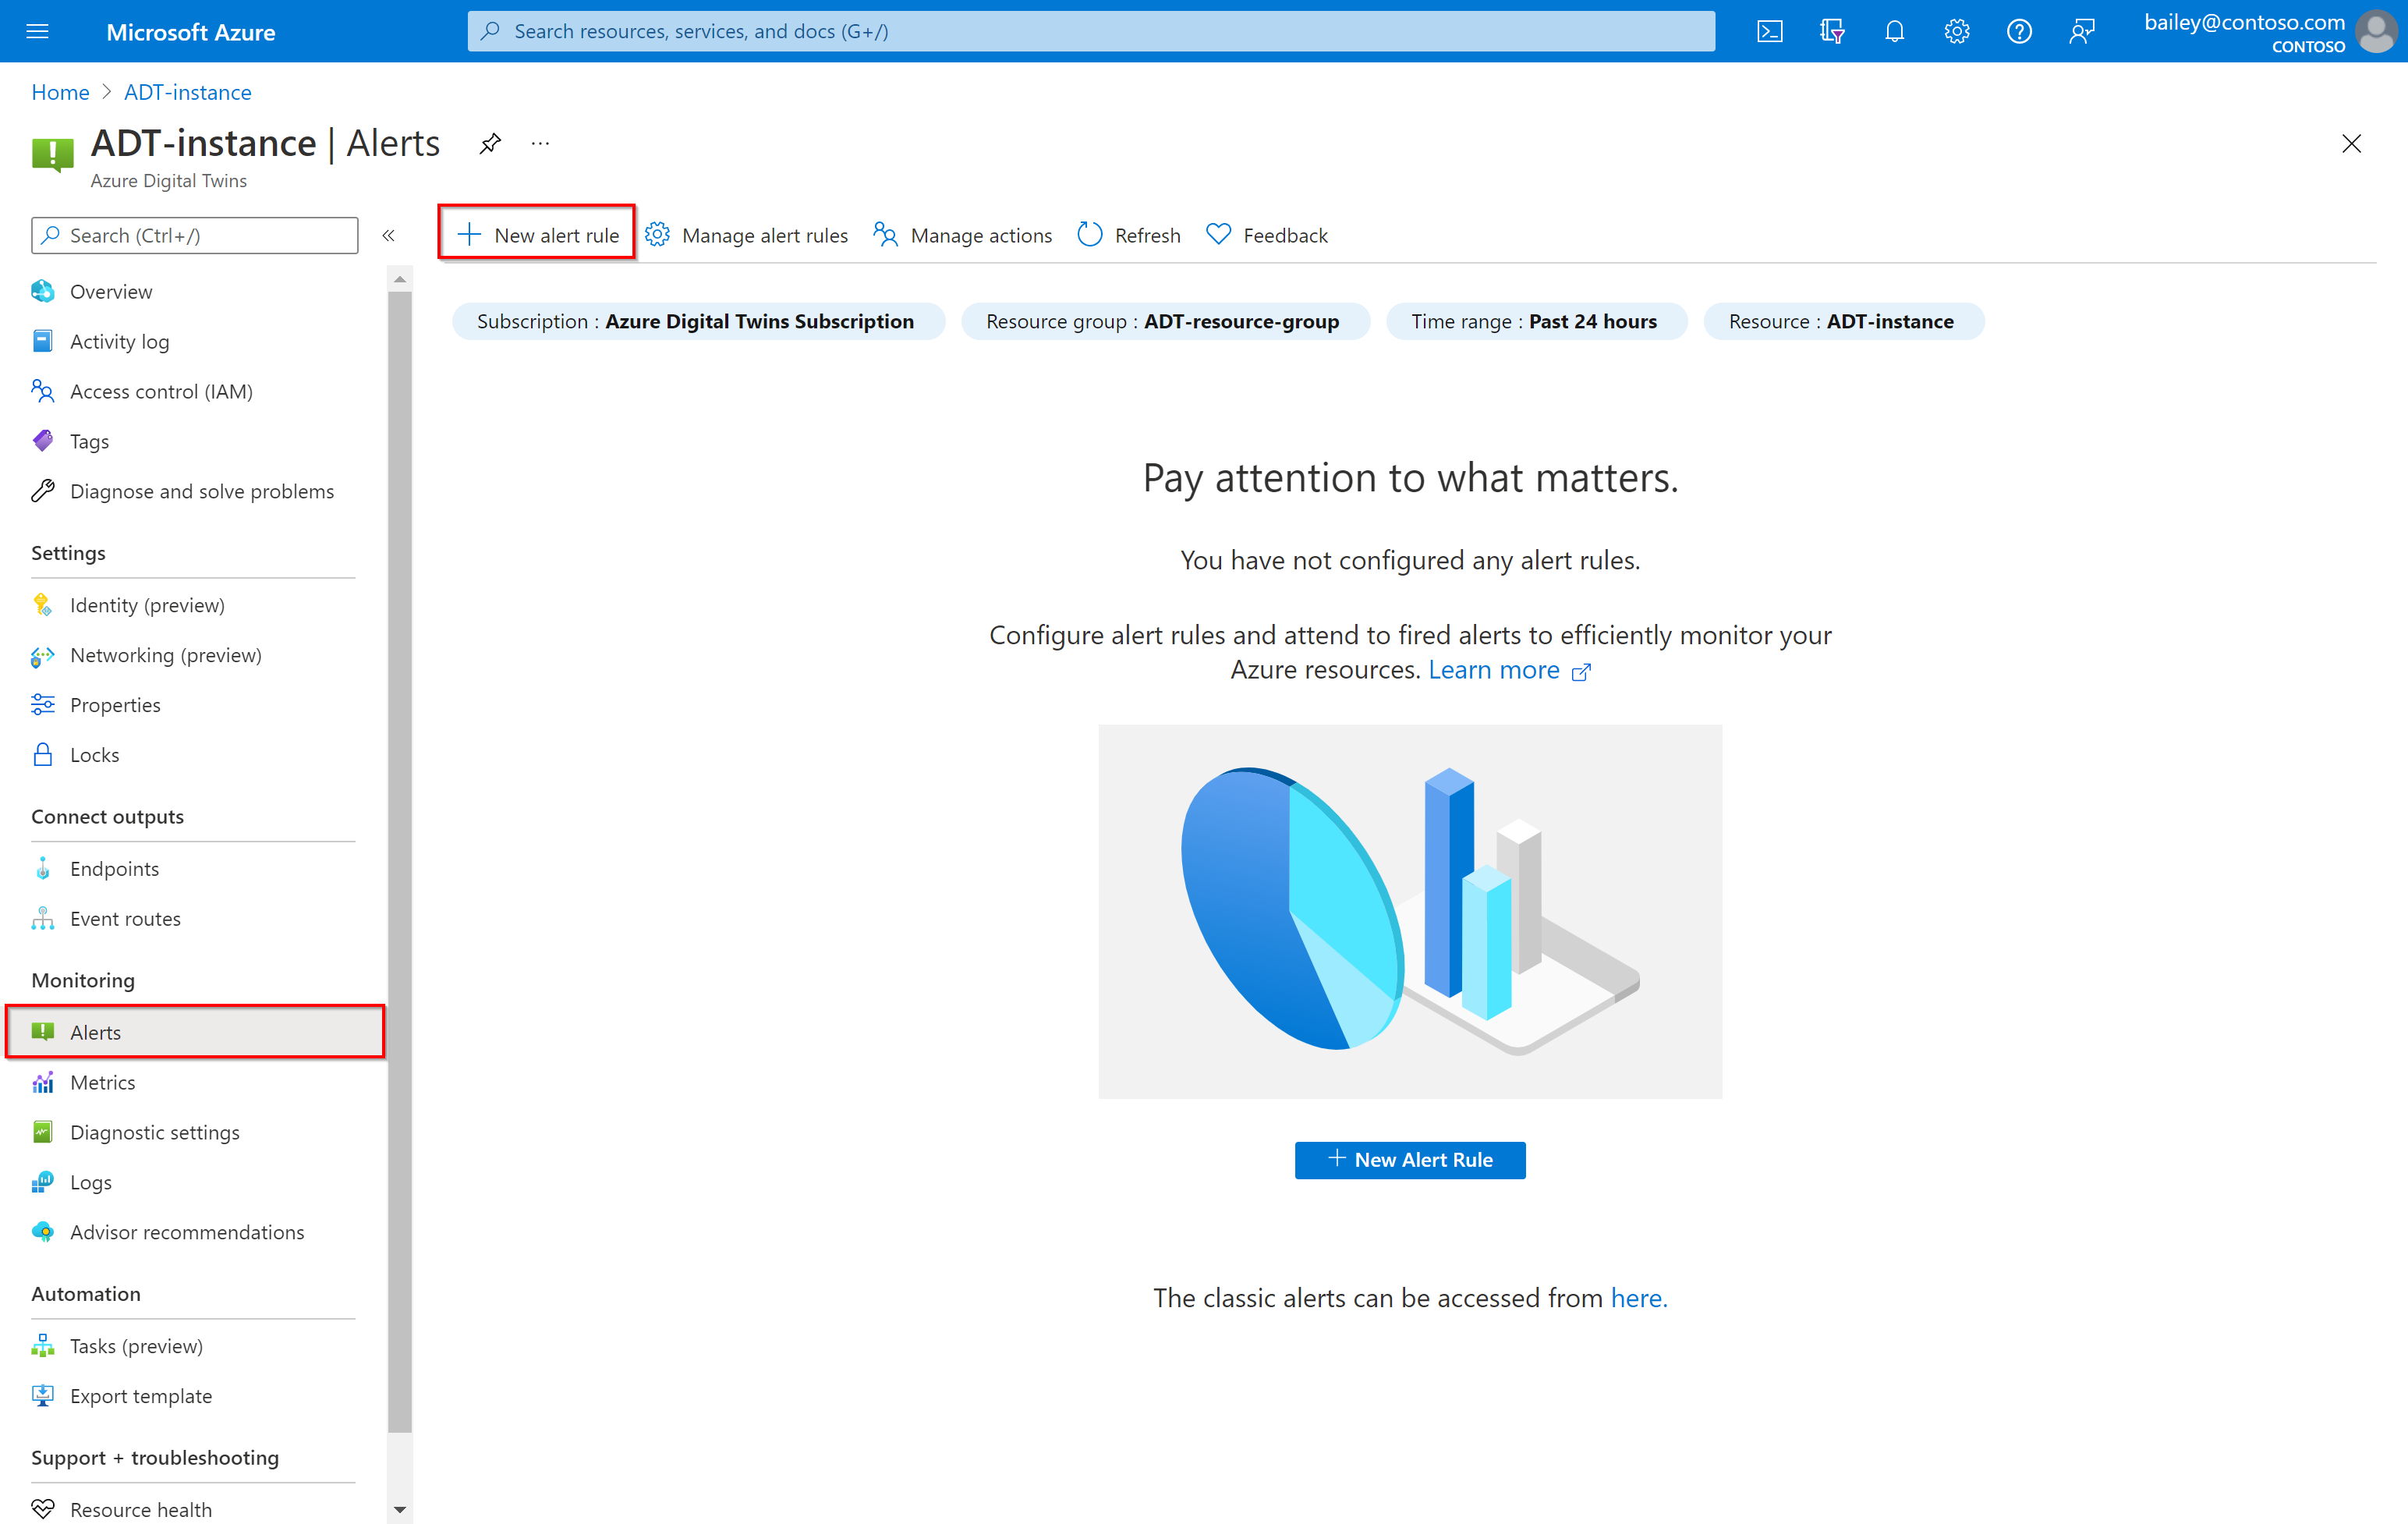 Screenshot showing the Alerts page and button to add in the Azure portal.